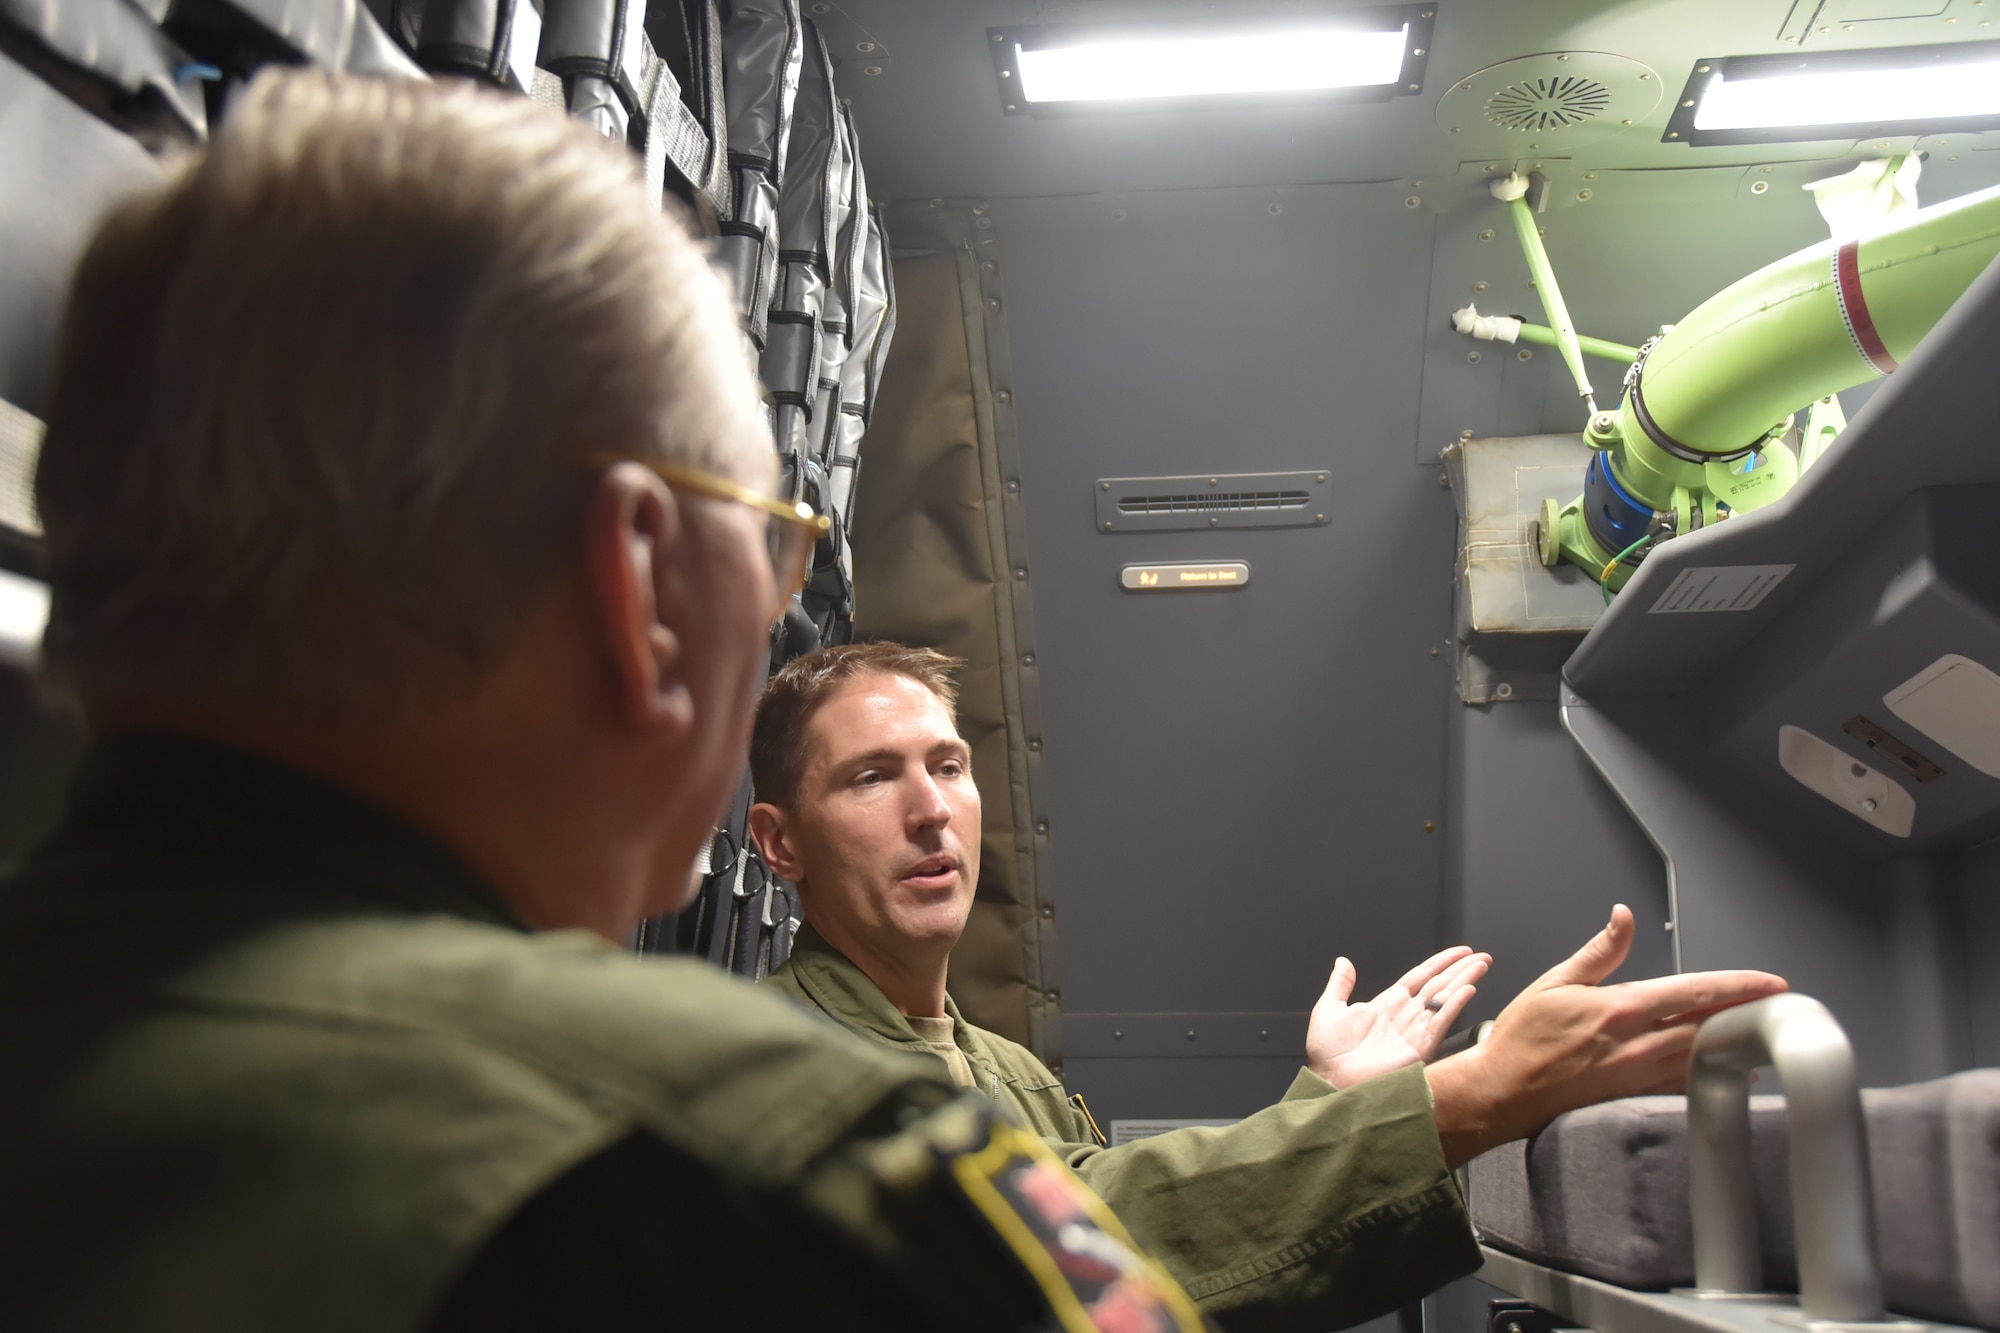 (Right to left) Capt. Matt Tener, 905th Air Refueling Squadron pilot, discusses the sleeping areas of the KC-46A Pegasus to Bill Schwertfeger, 931st Air Refueling Wing civic leader on a KC-46.